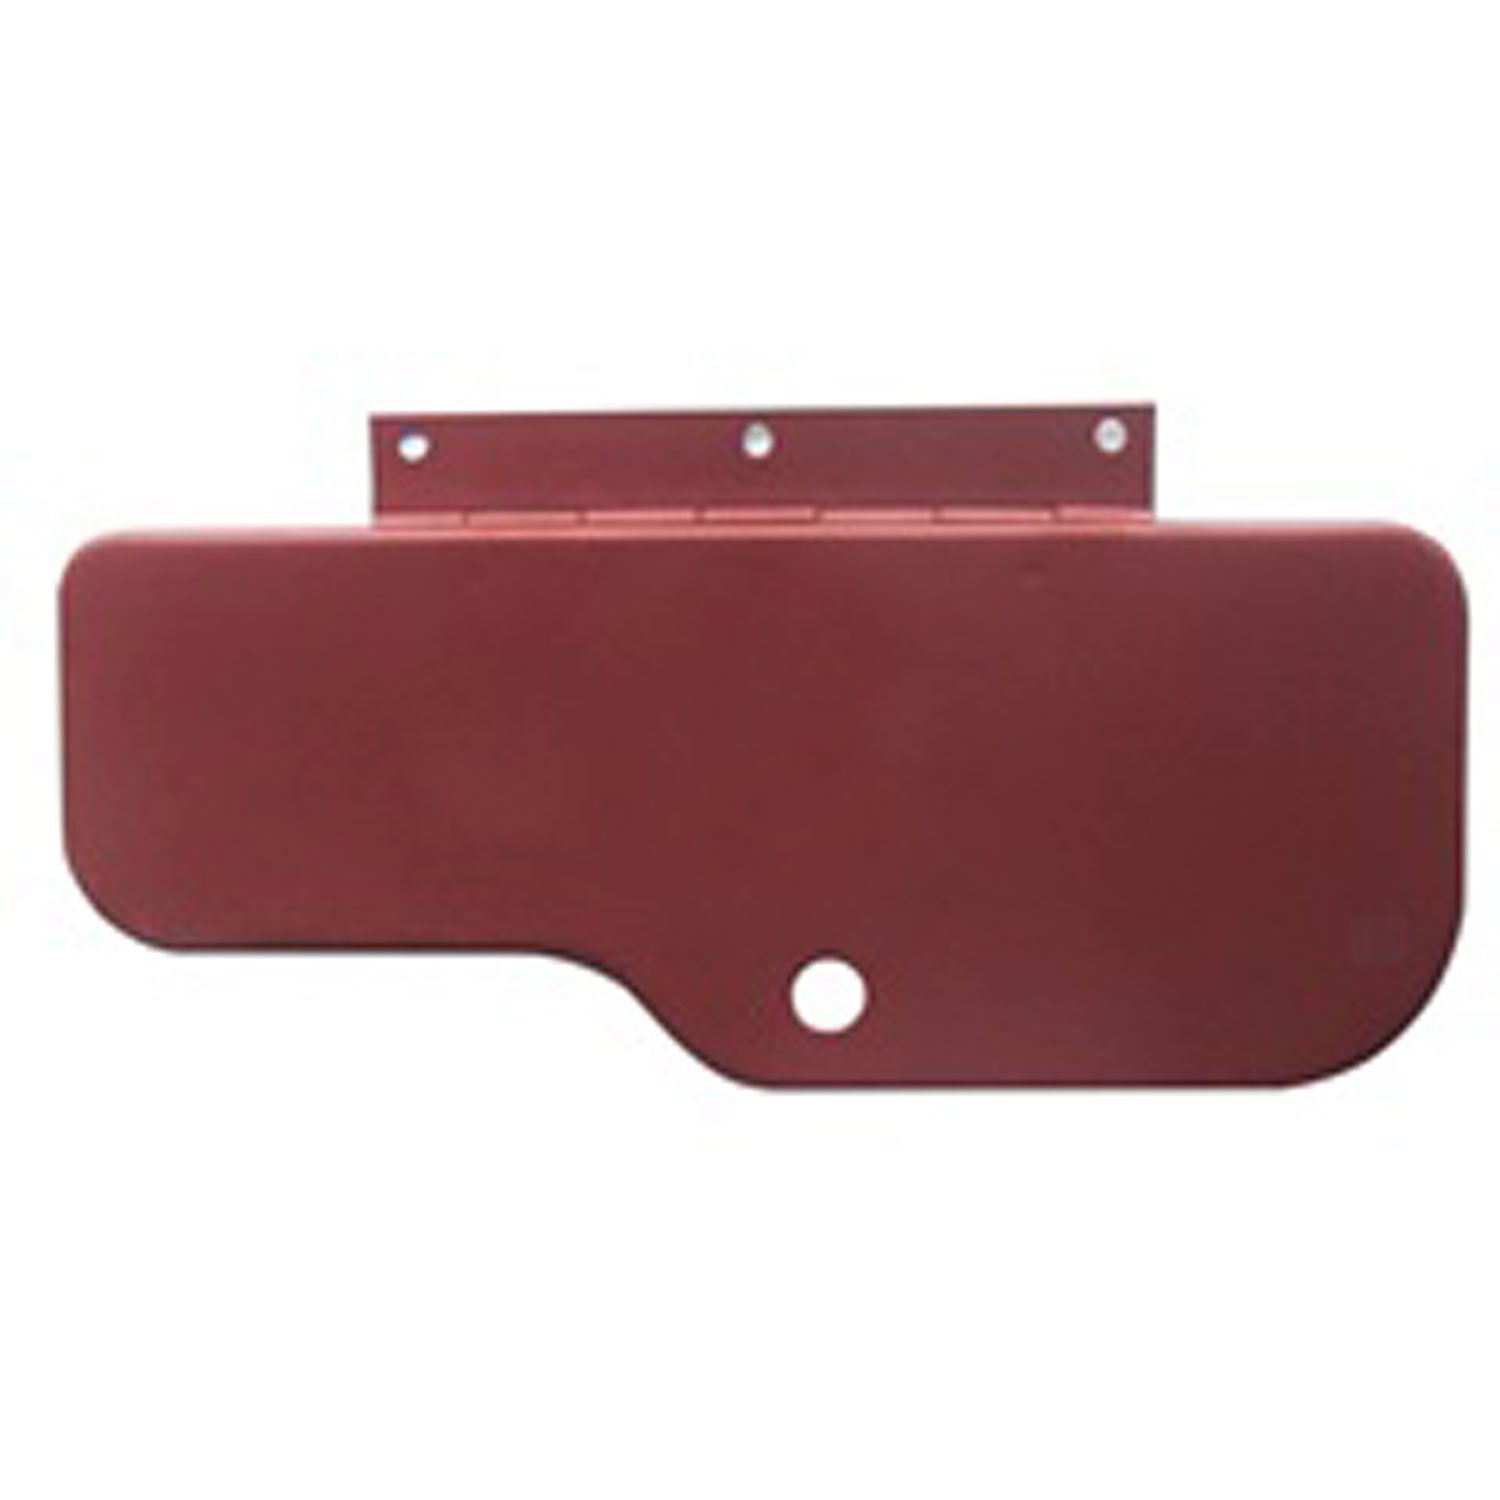 Replacement glove box door from Omix-ADA, Fits 41-45 Willys MB and Ford GPW.